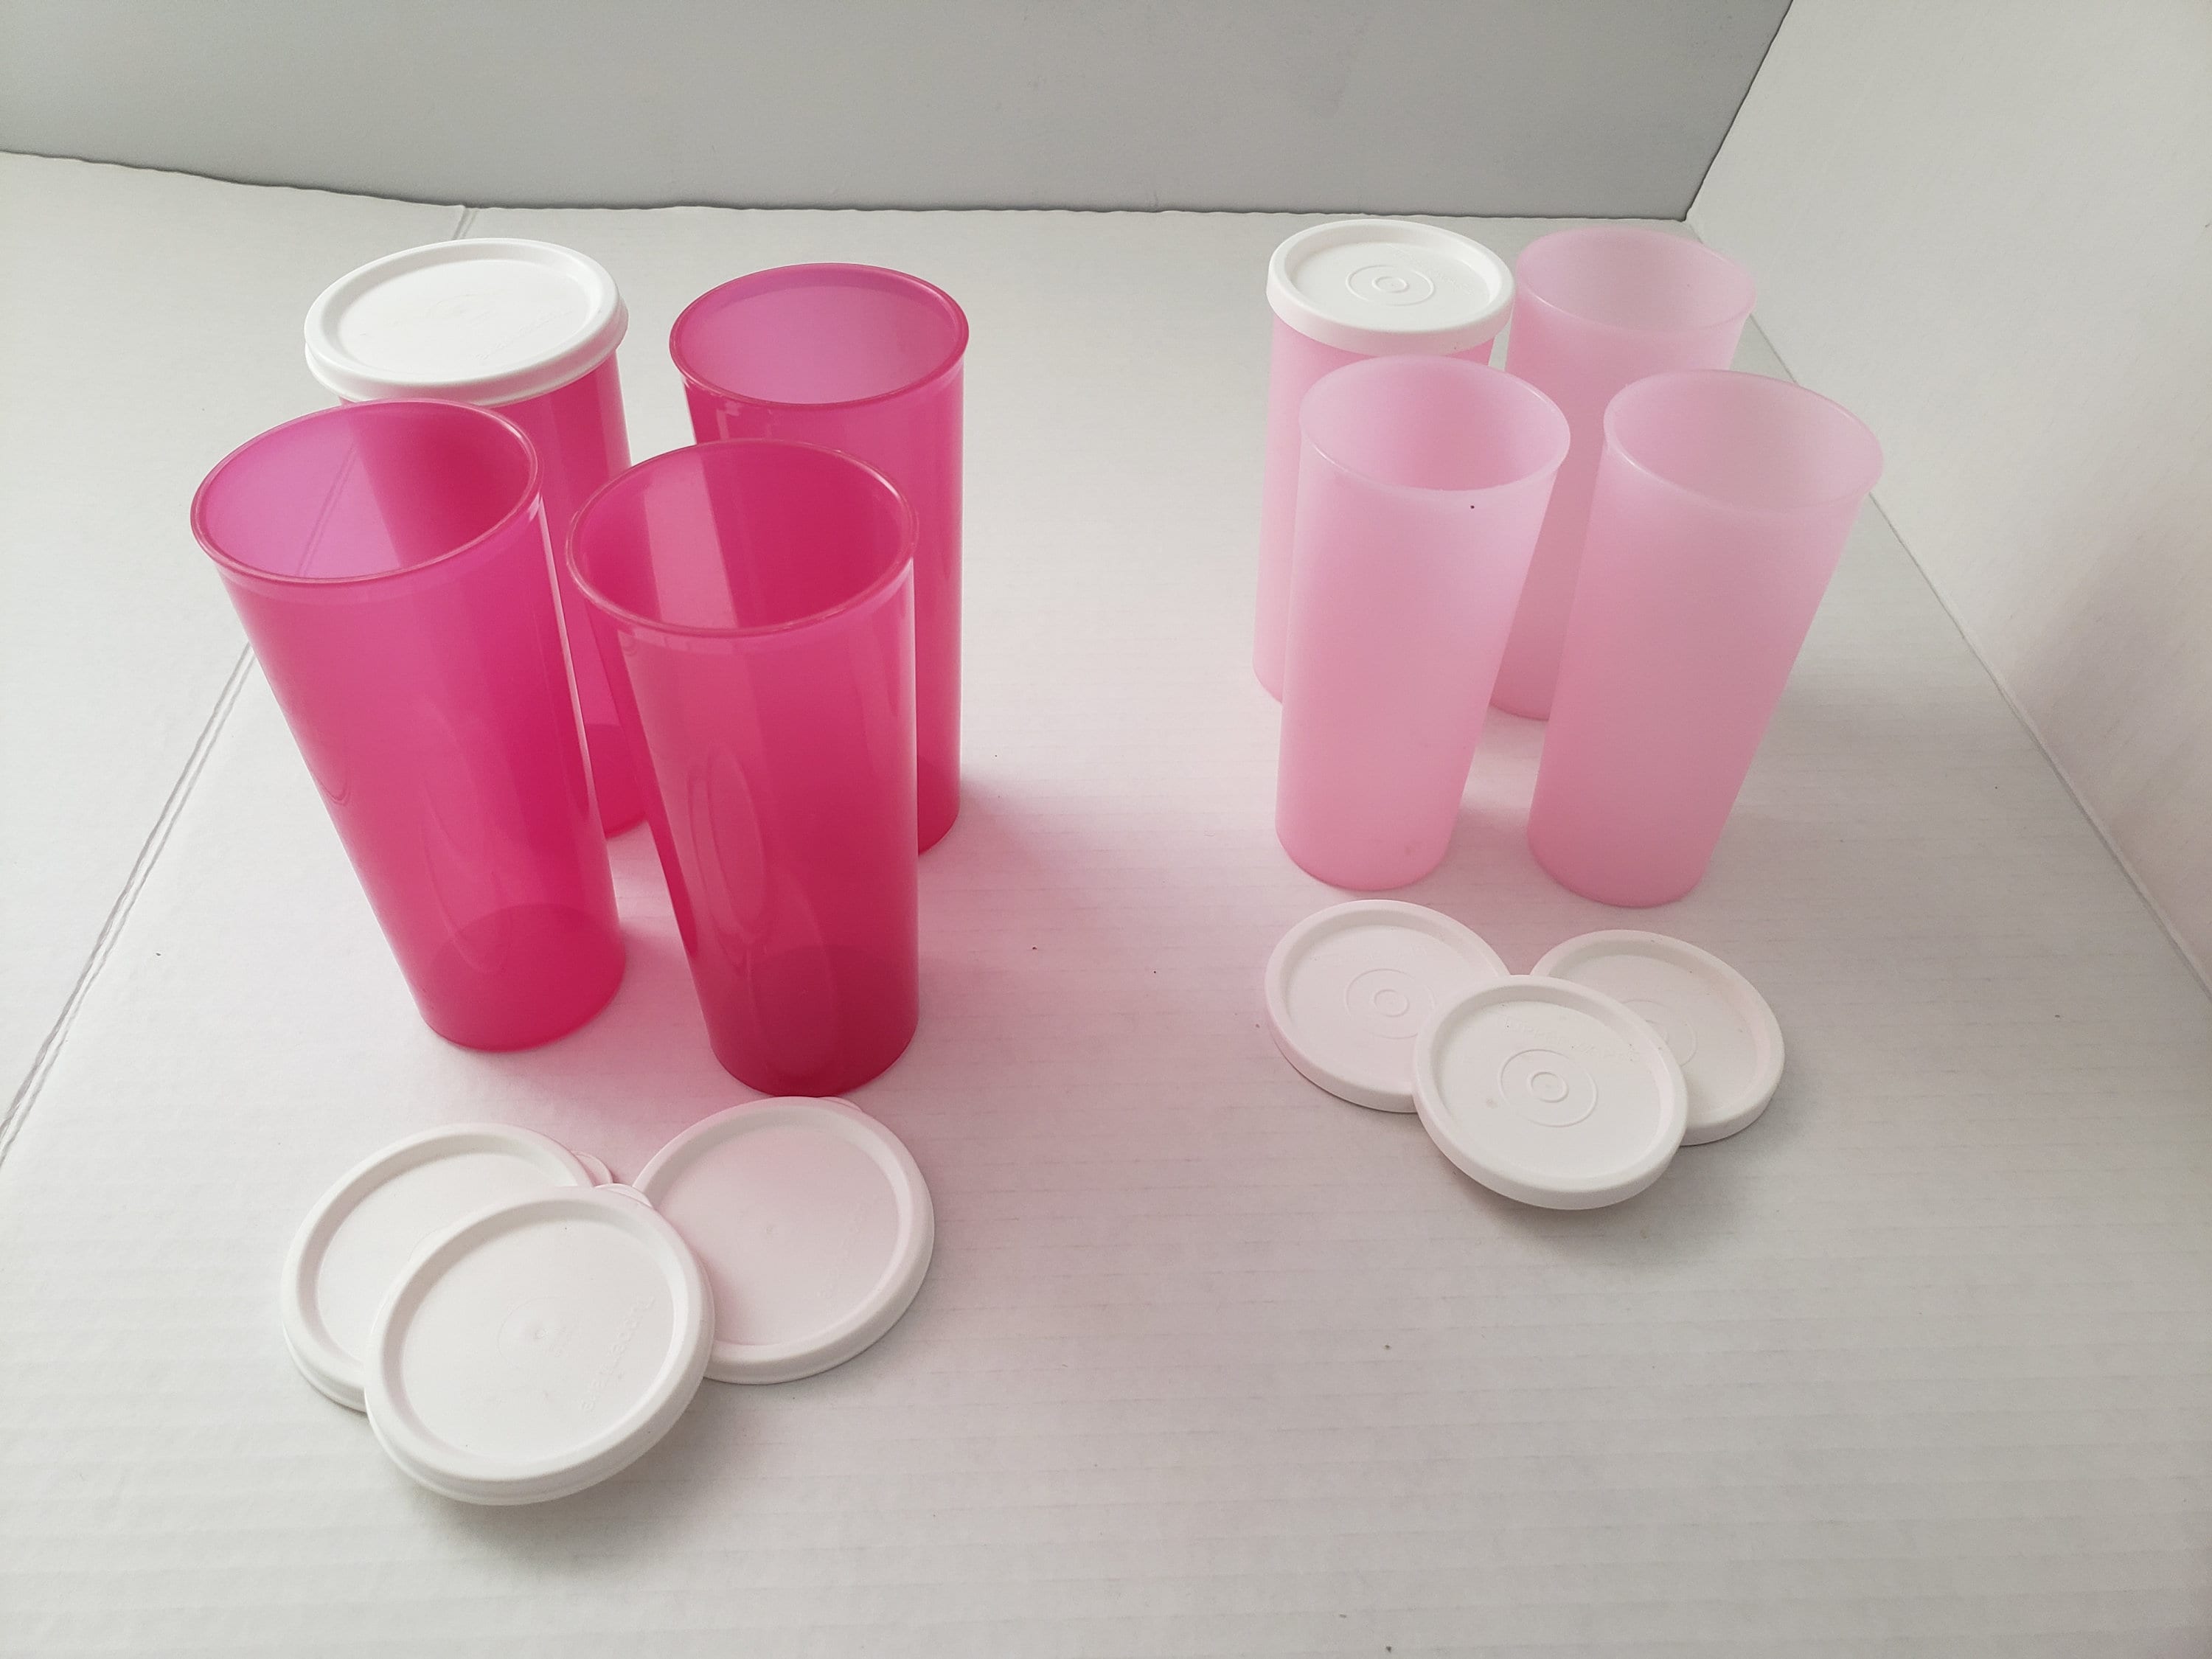 Tupperware Clear Tumbler Small with Cover - 230ml